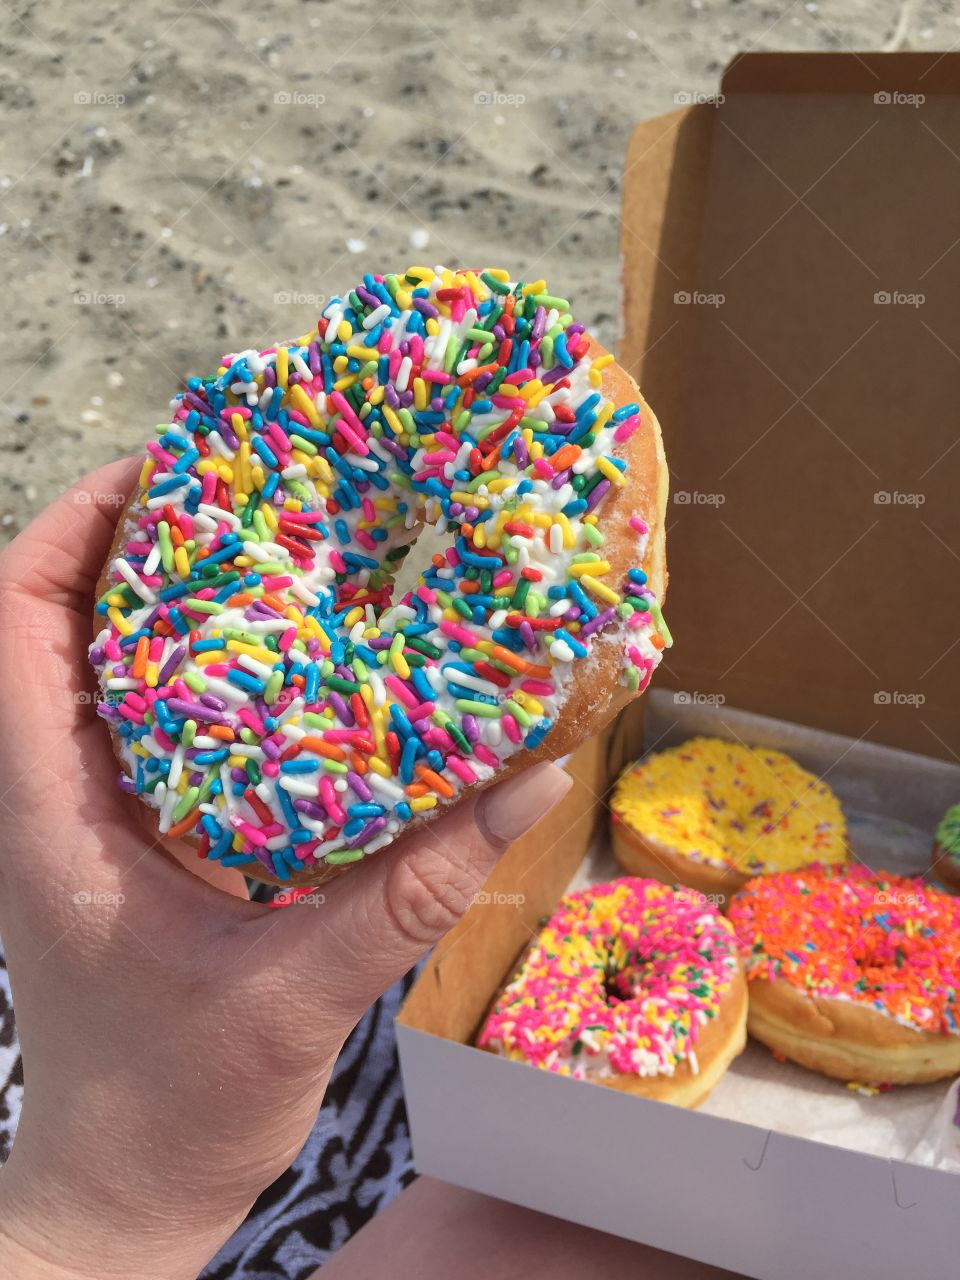 A hand holding a rainbow donut on the beach with a box of donuts in the background 